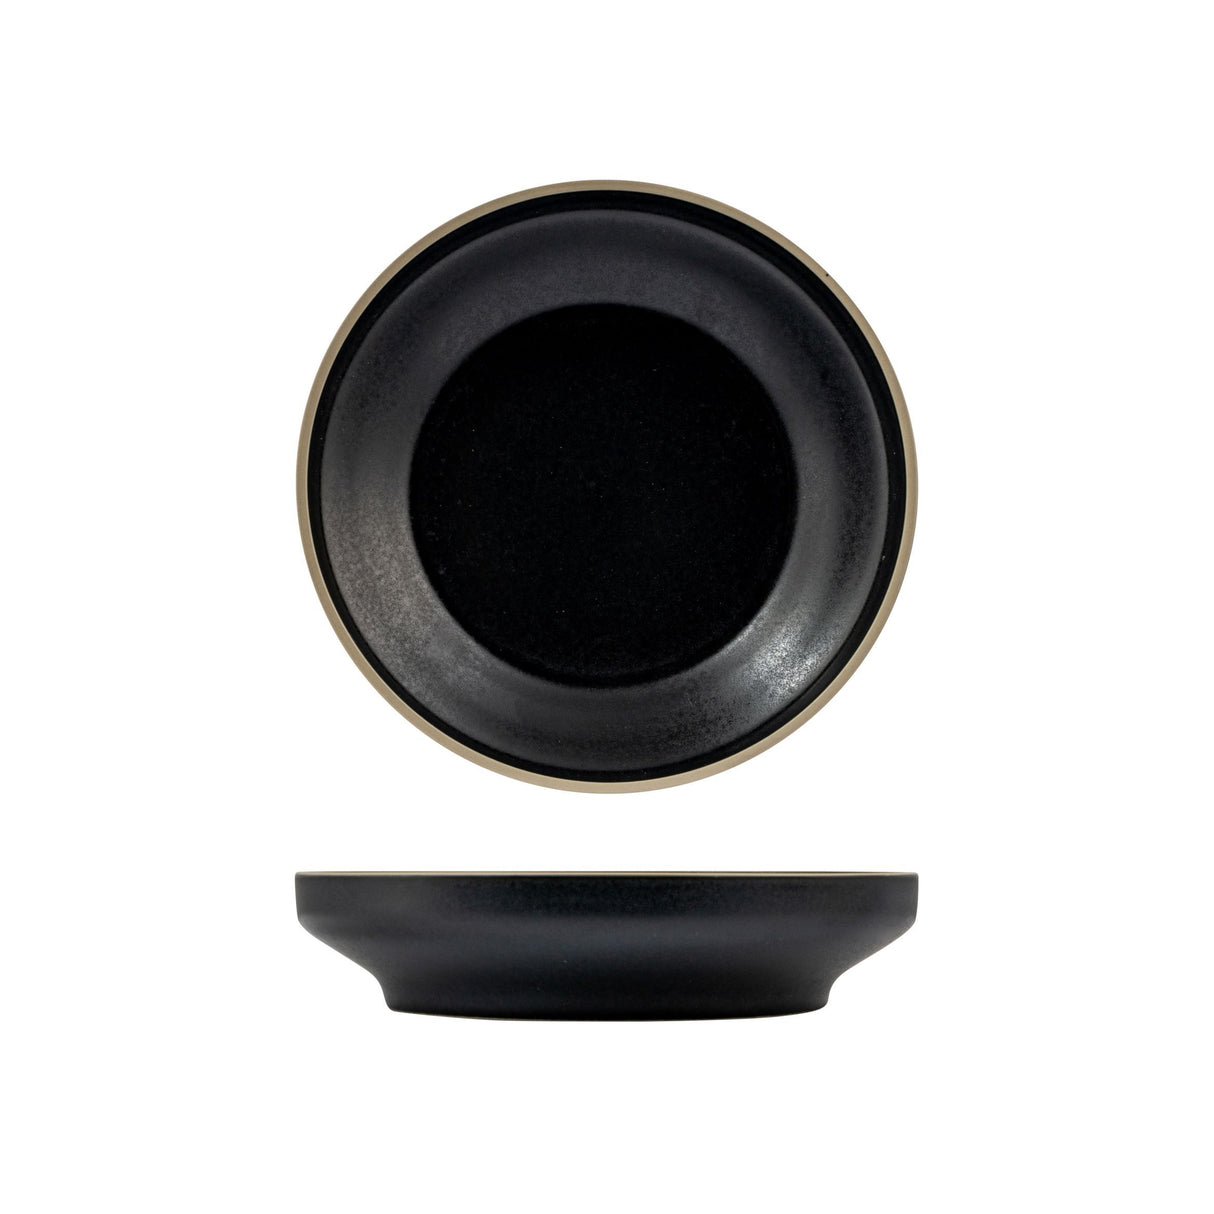 Share Bowl - 228mm, midnight: Pack of 4